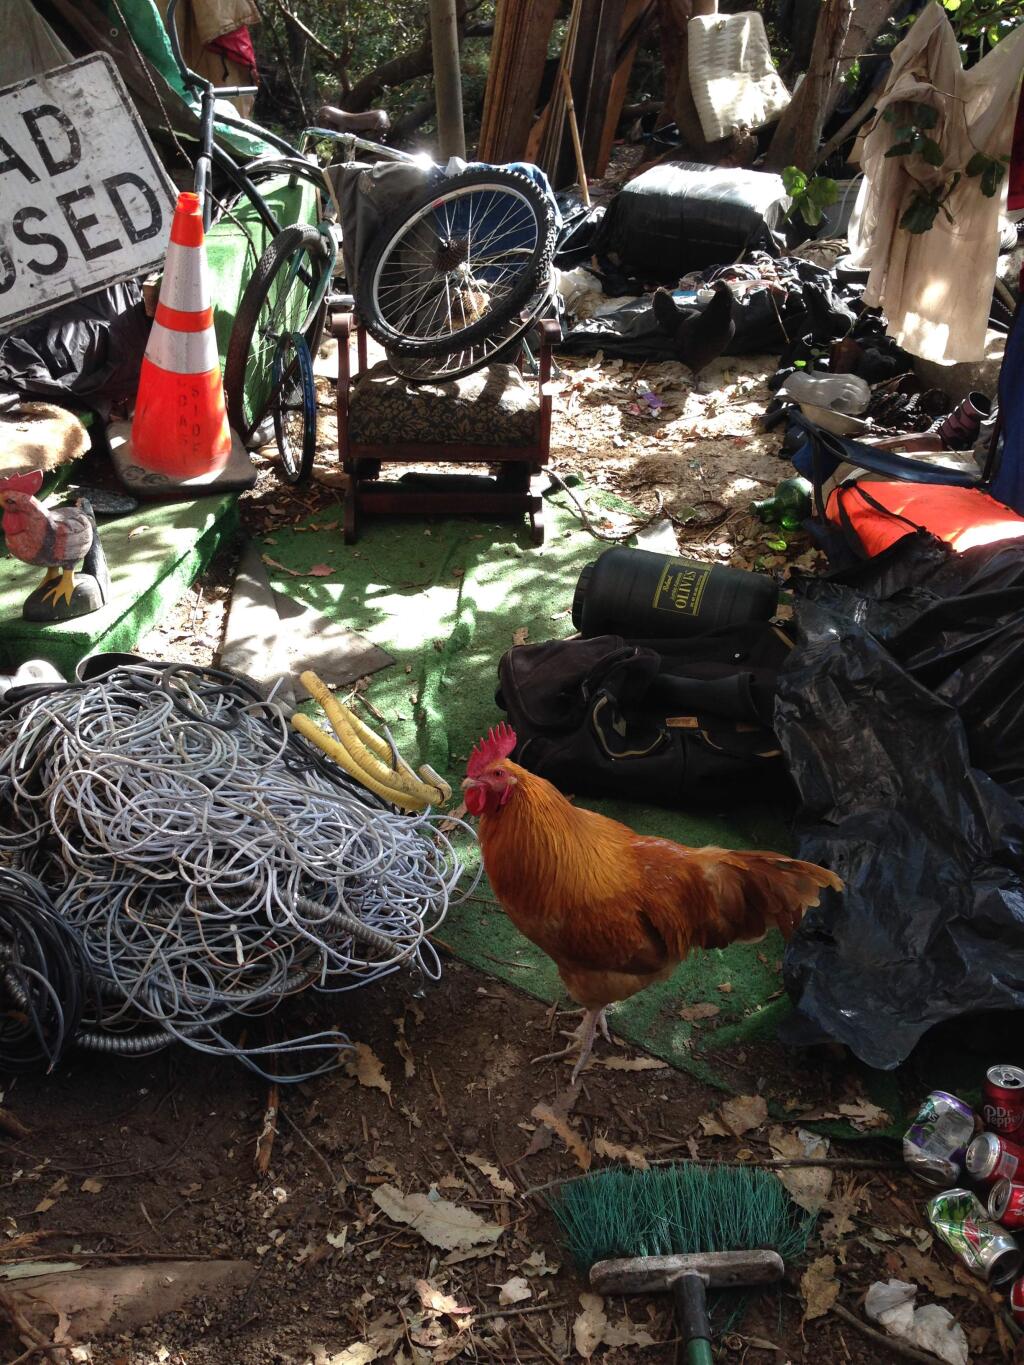 A chicken and road signs were among the items left behind in an abandoned homeless encampment off Petaluma Boulevard. Petaluma police officers did a sweep of homeless camps on Tuesday.